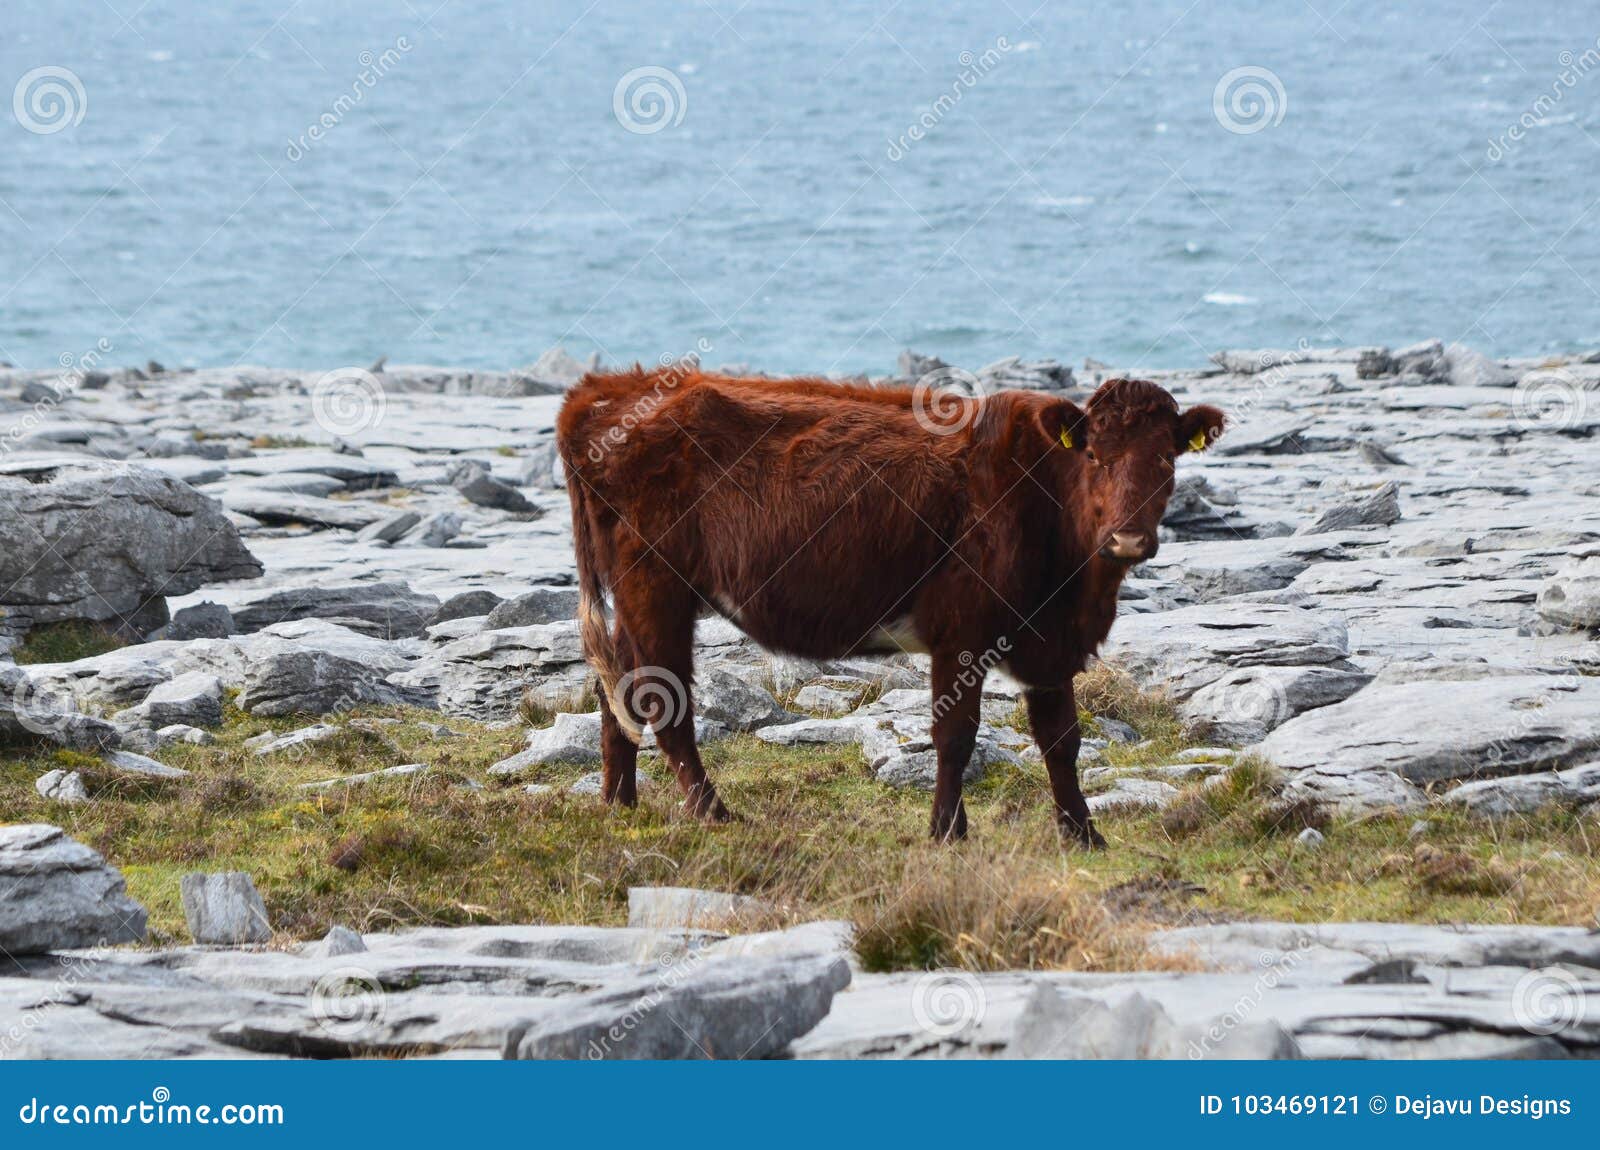 side view of a large celtic cow in burren